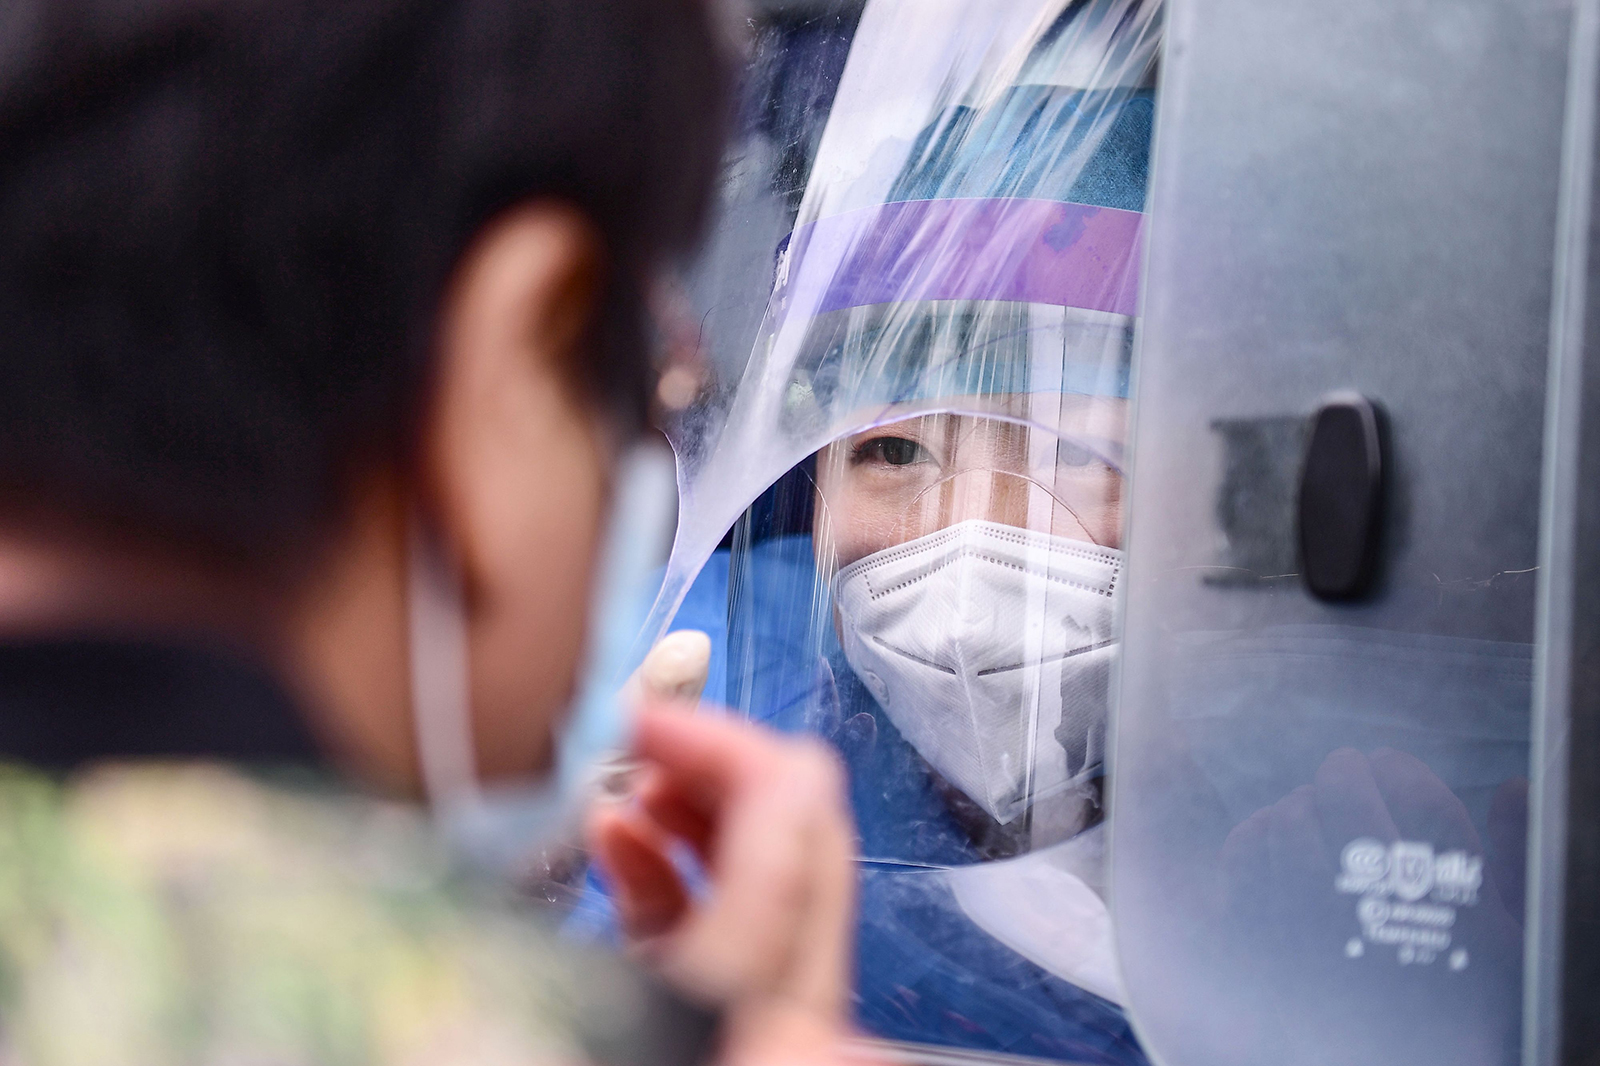 A health worker carries out a Covid-19 test on a resident in a testing vehicle in Shenyang in China's northeastern Liaoning province on July 29.